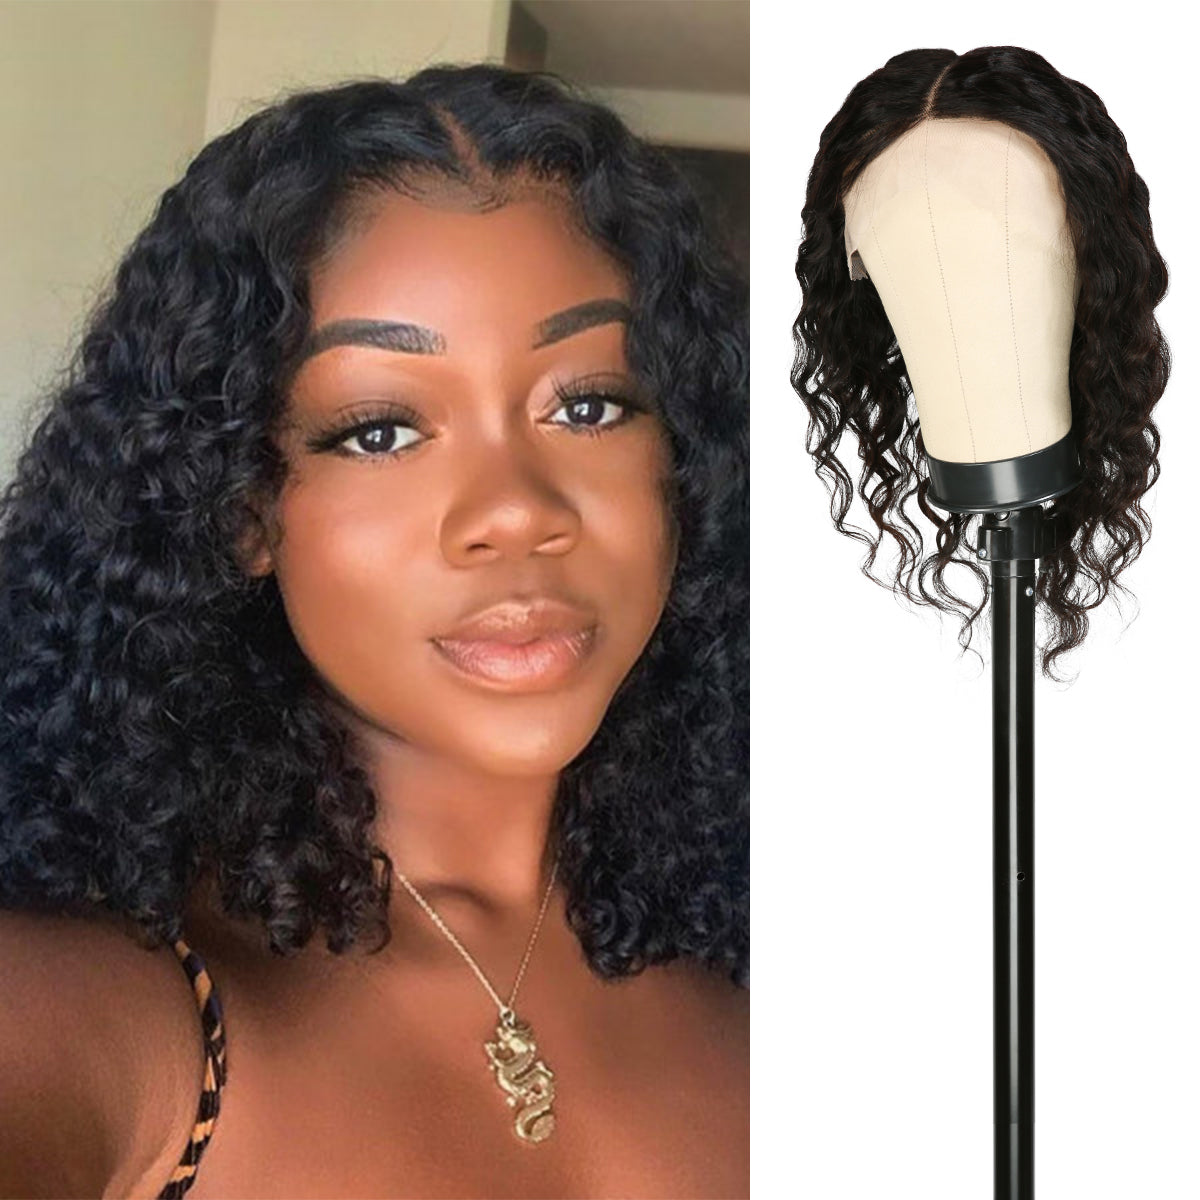 T part wig has a full front hairline area. So, this leads to a similar natural result that you would get with a more expensive lace frontal wig. 150% Density Transparent Lace Wig made with Virgin Human hair,  Pre-plucked to perfection, Best summer vacation wigs, Natural color wig, Pre-Plucked with Baby Hair, Low maintenance hairstyle. Fits All Face Shapes.